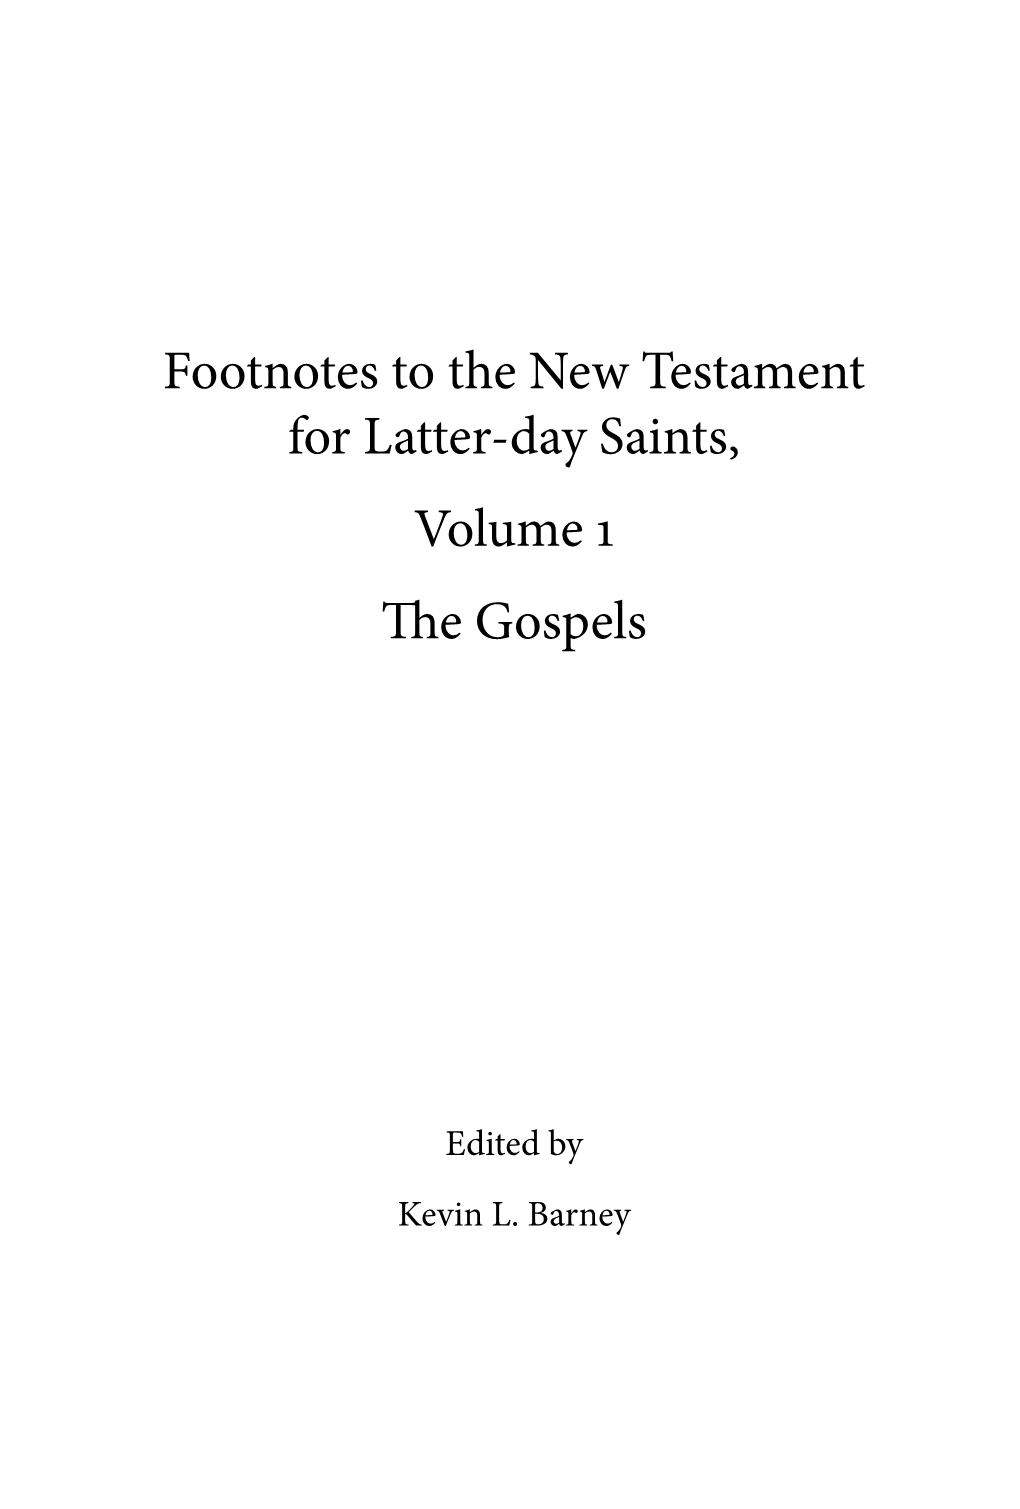 Footnotes to the New Testament for Latter-Day Saints, Volume 1 the Gospels